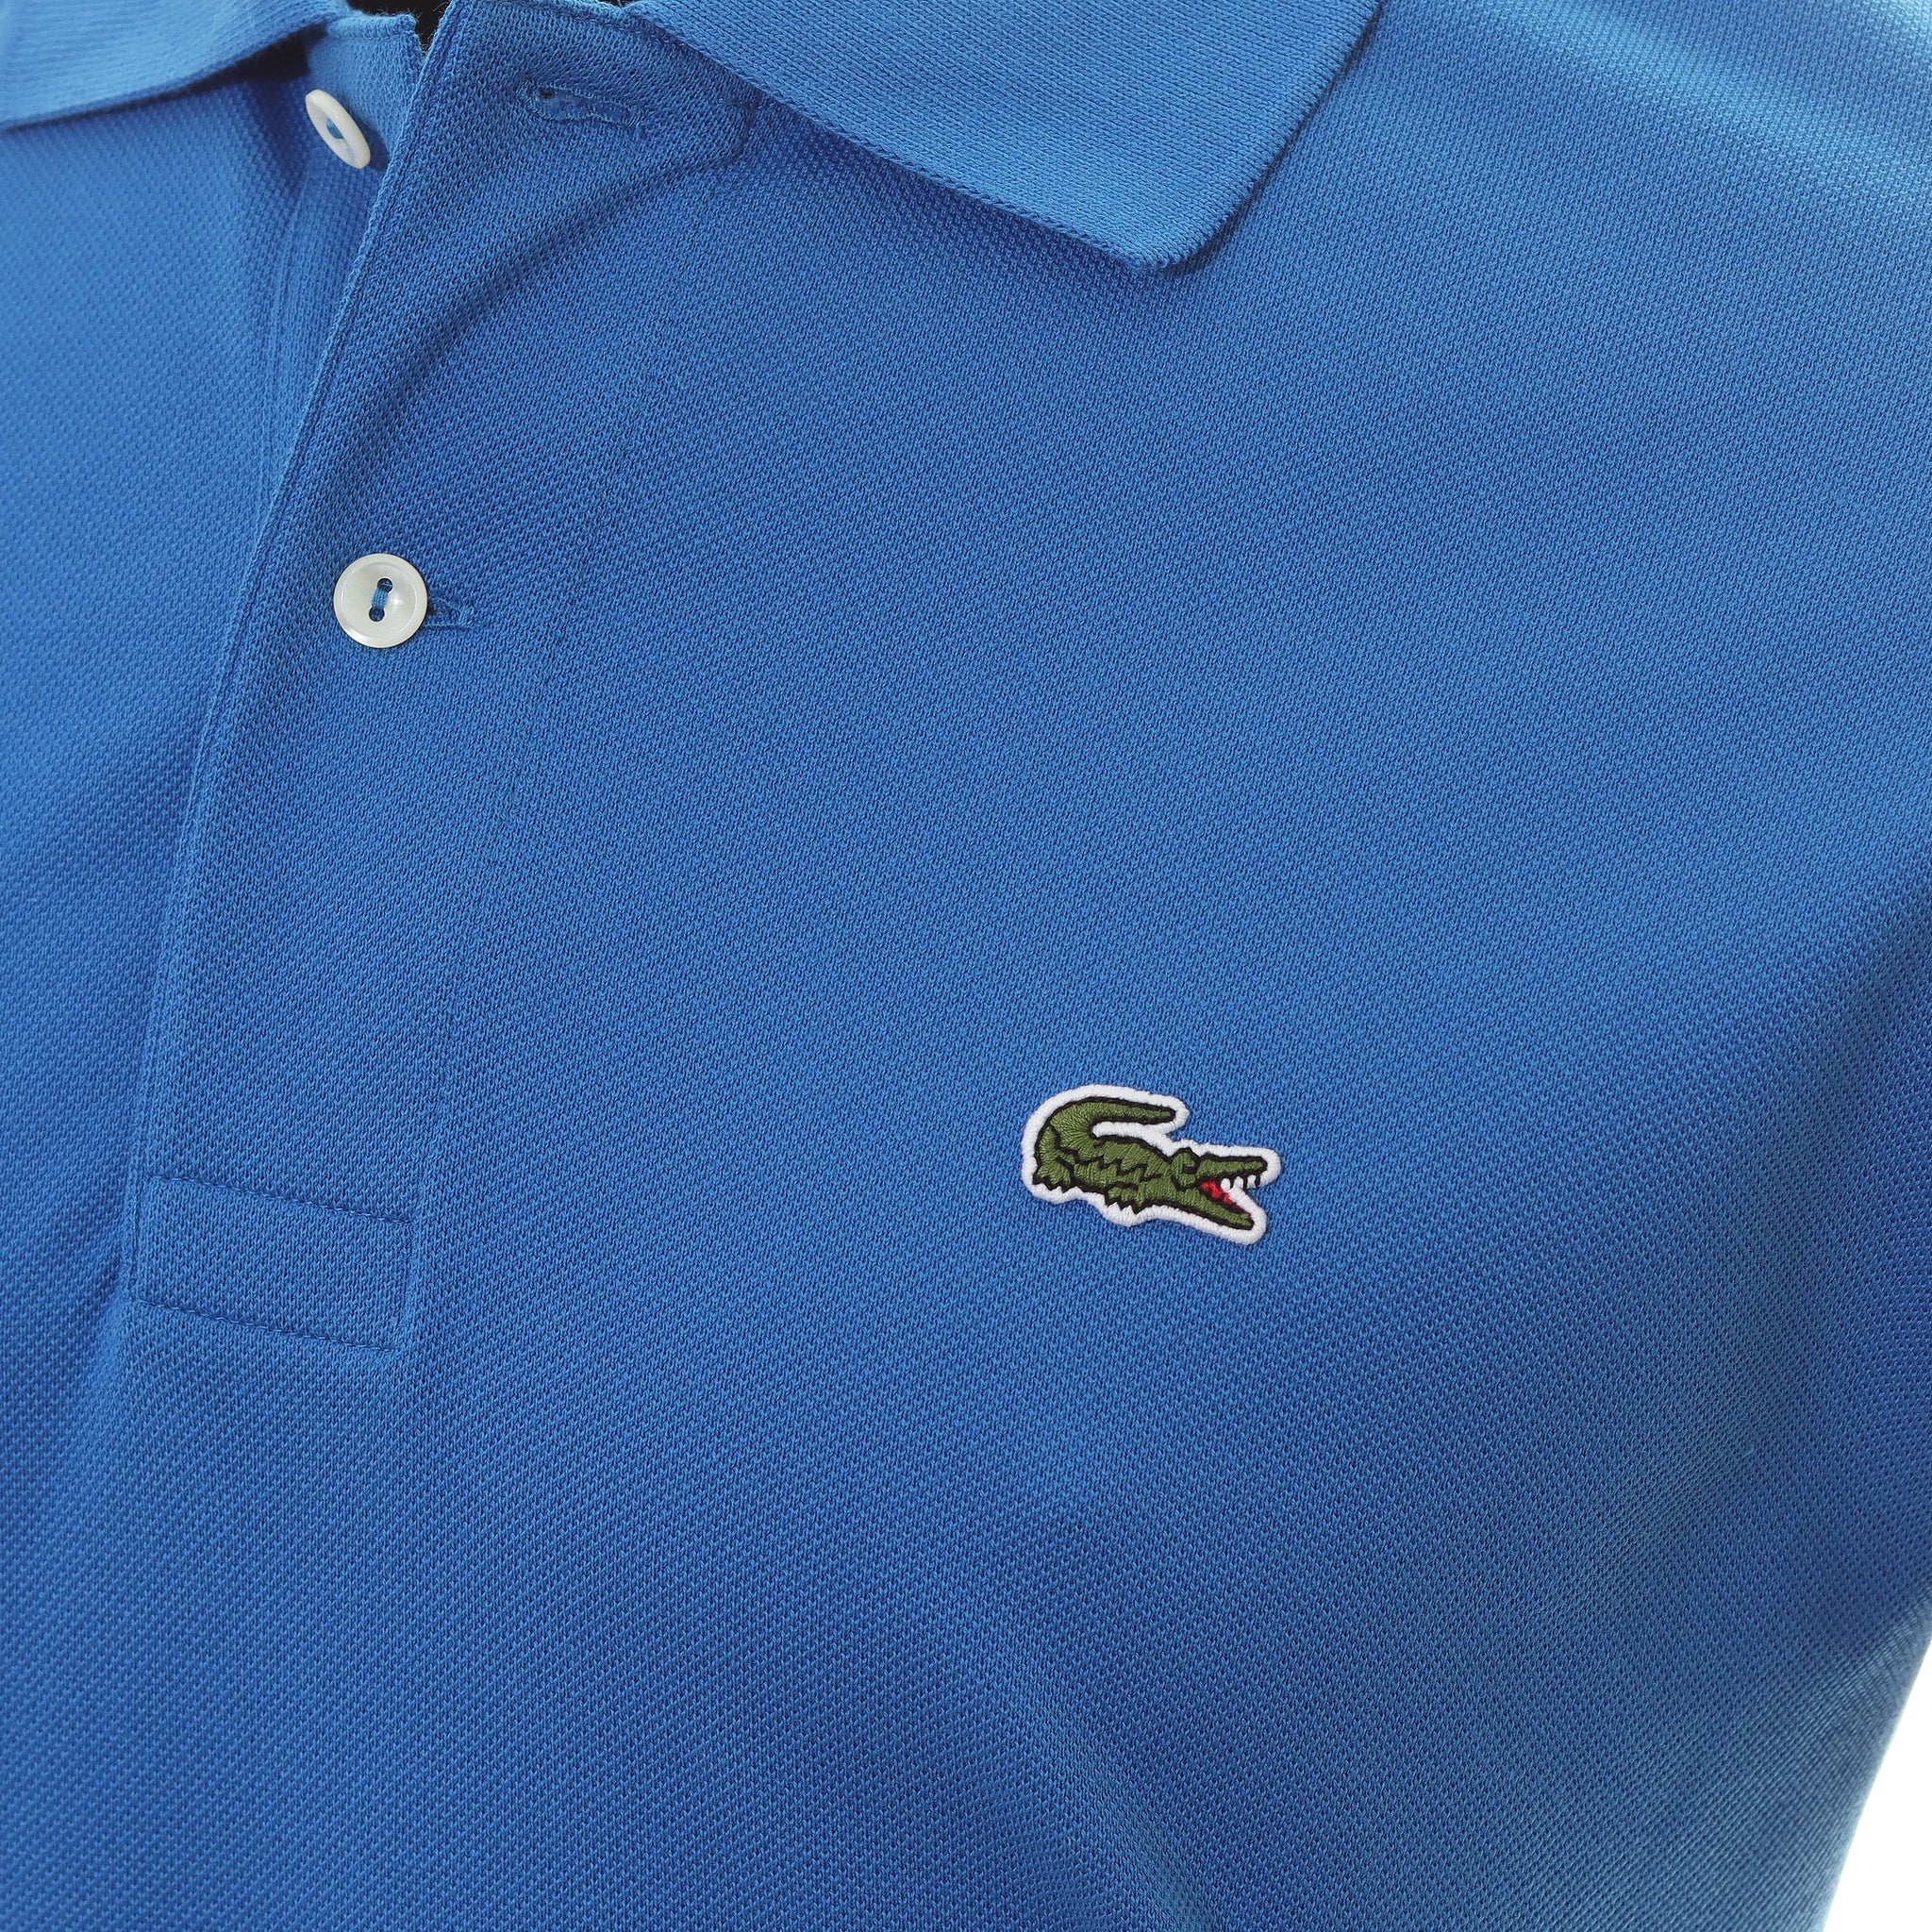 Lacoste Classic Pique Polo Shirt L1212 Blue SIY | Function18